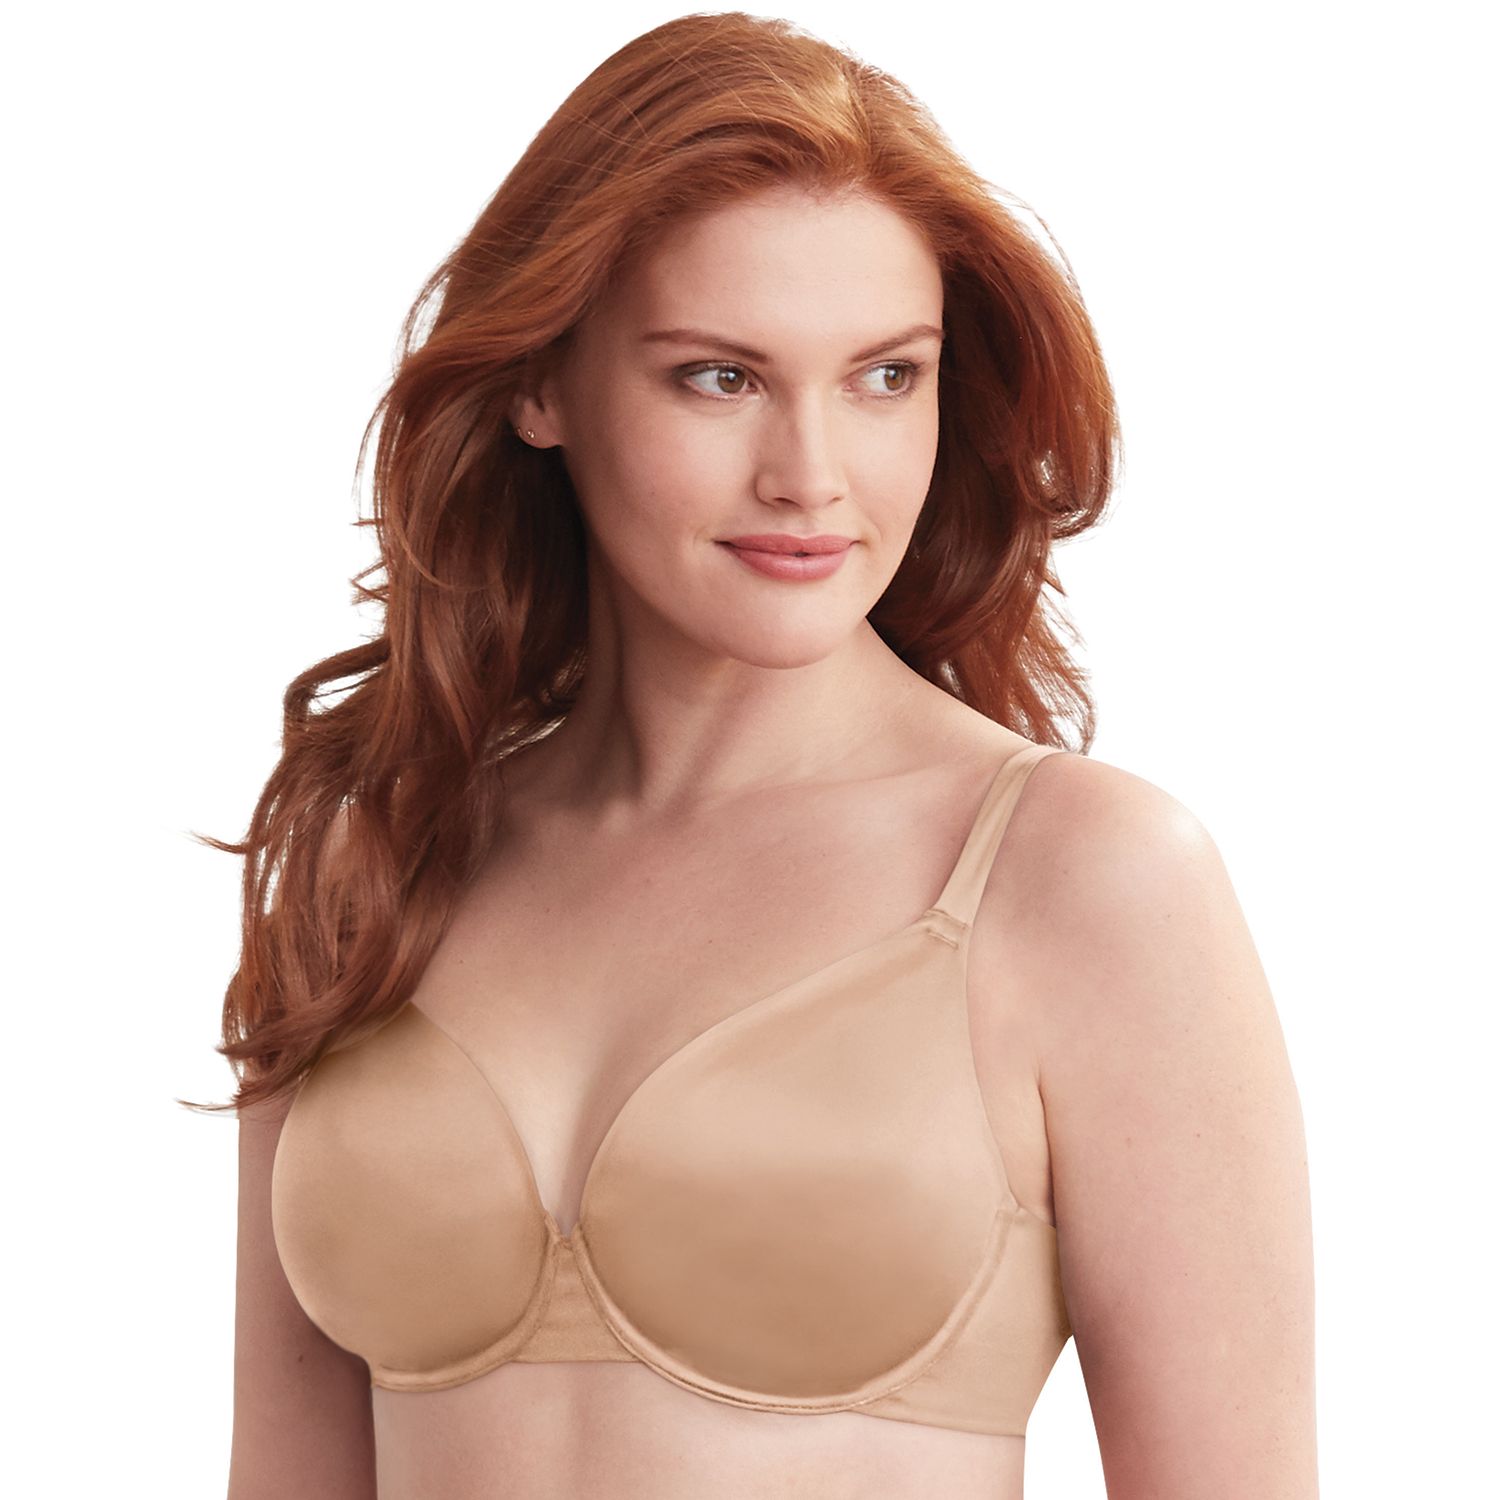 bras that lift without underwire